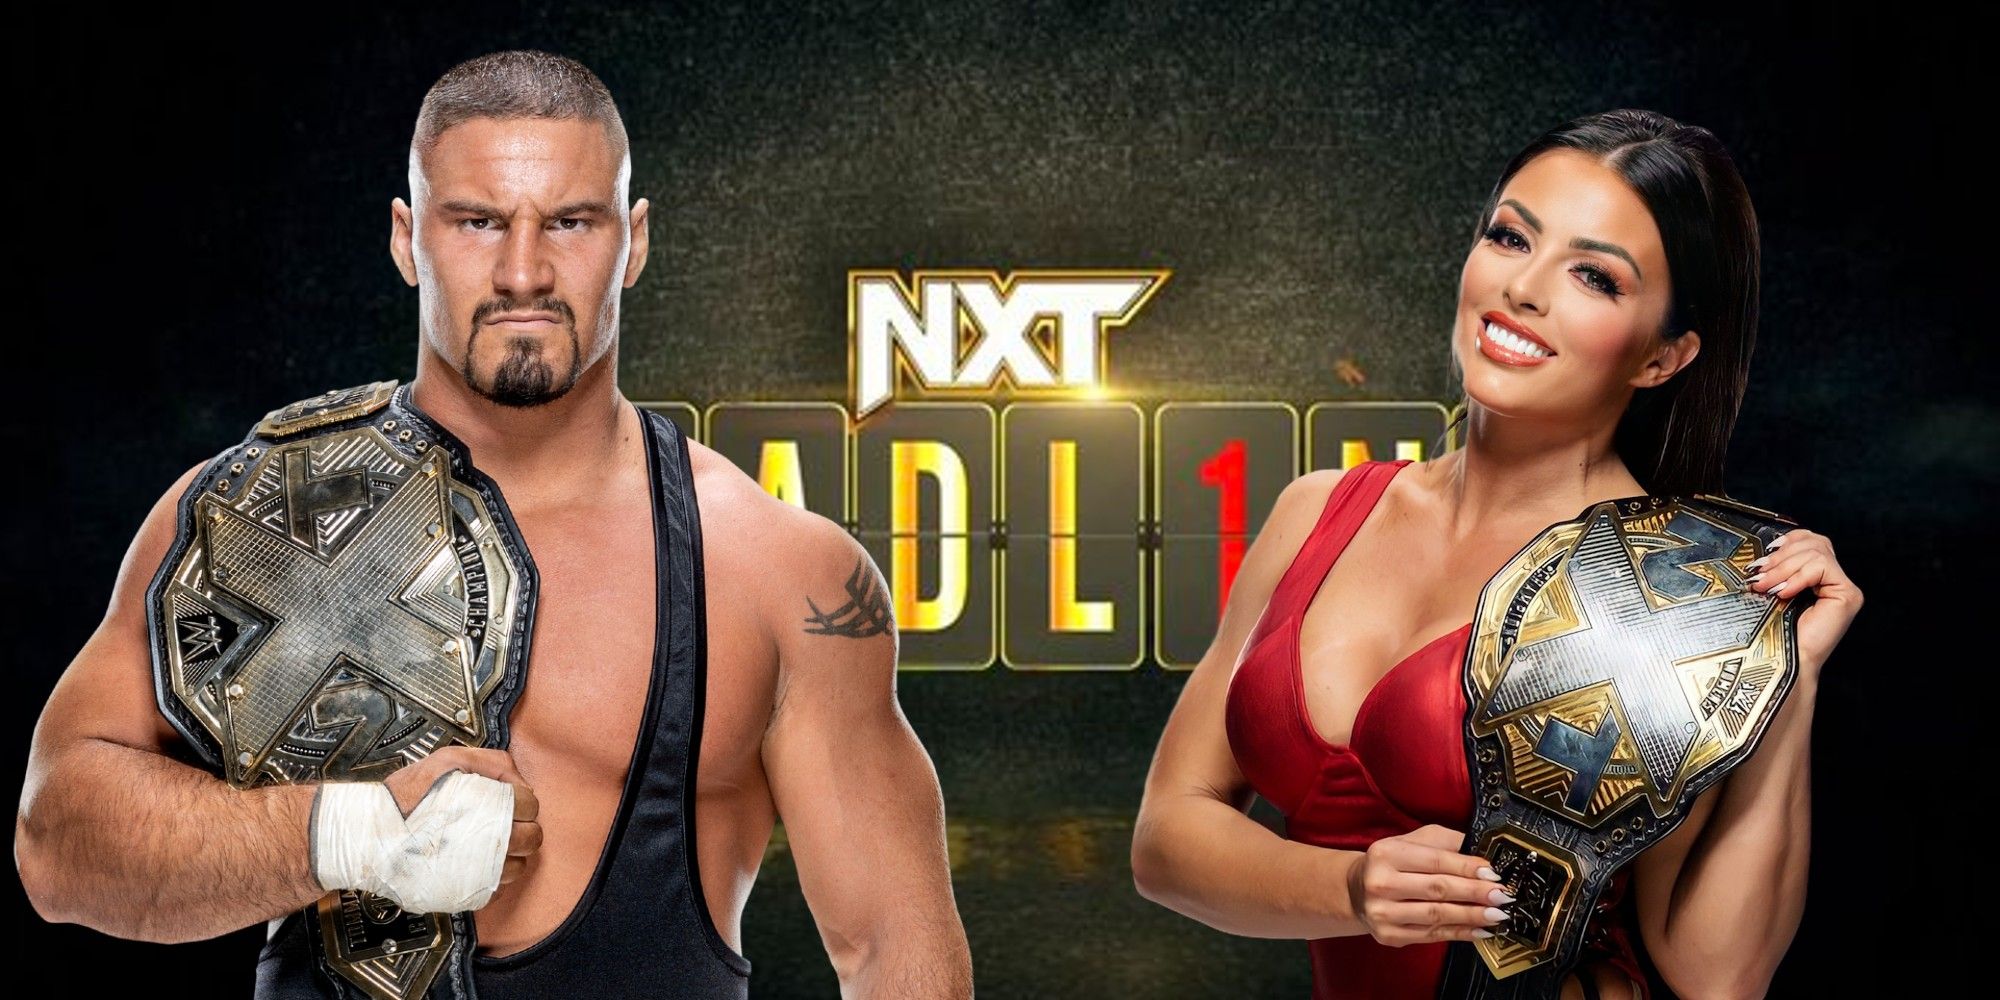 NXT Deadline 2022 Guide: Match Card, Predictions